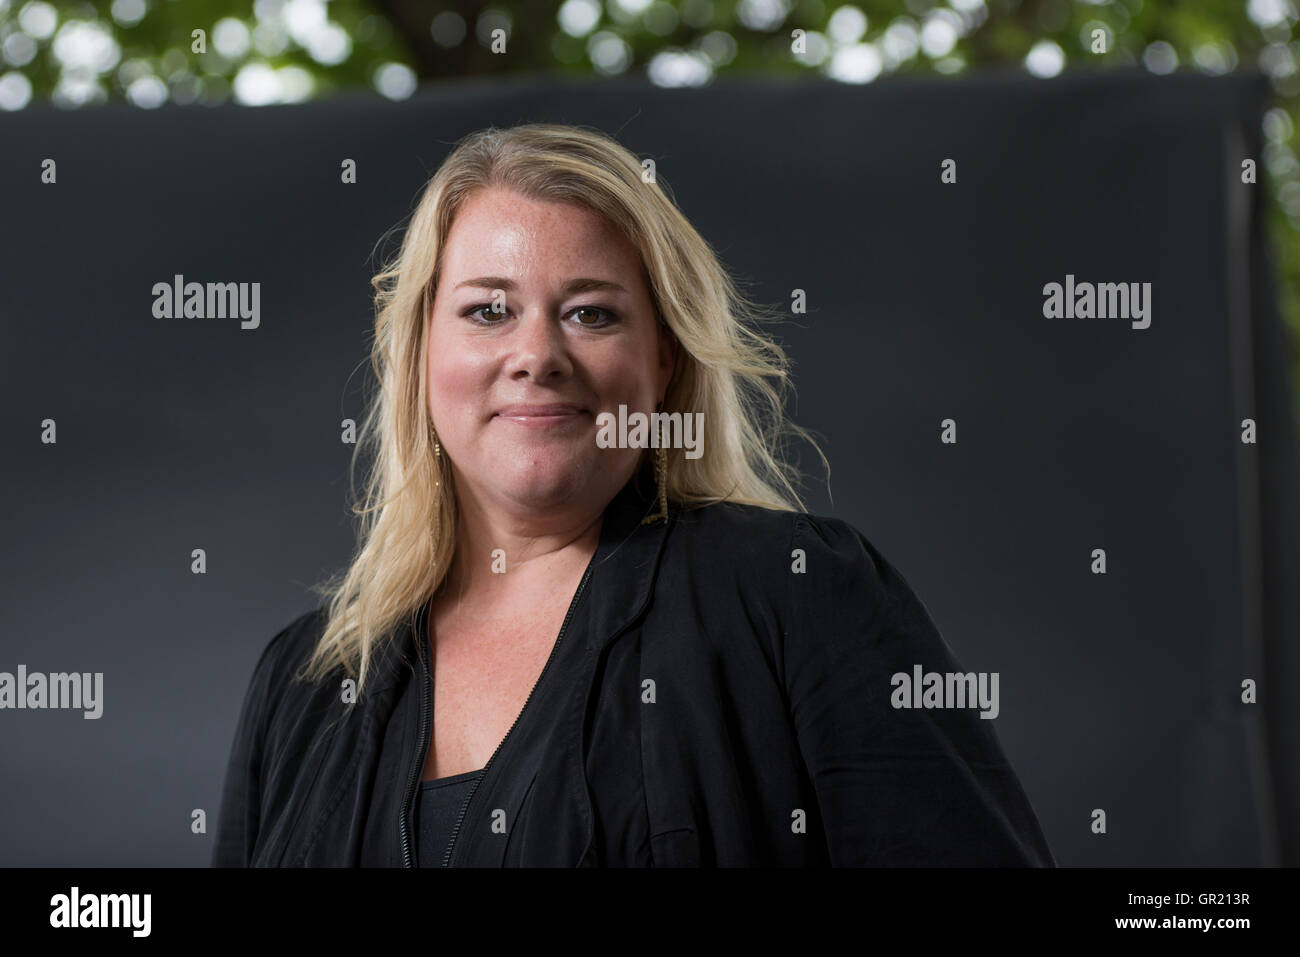 English author of historical fiction Robyn Young. Stock Photo